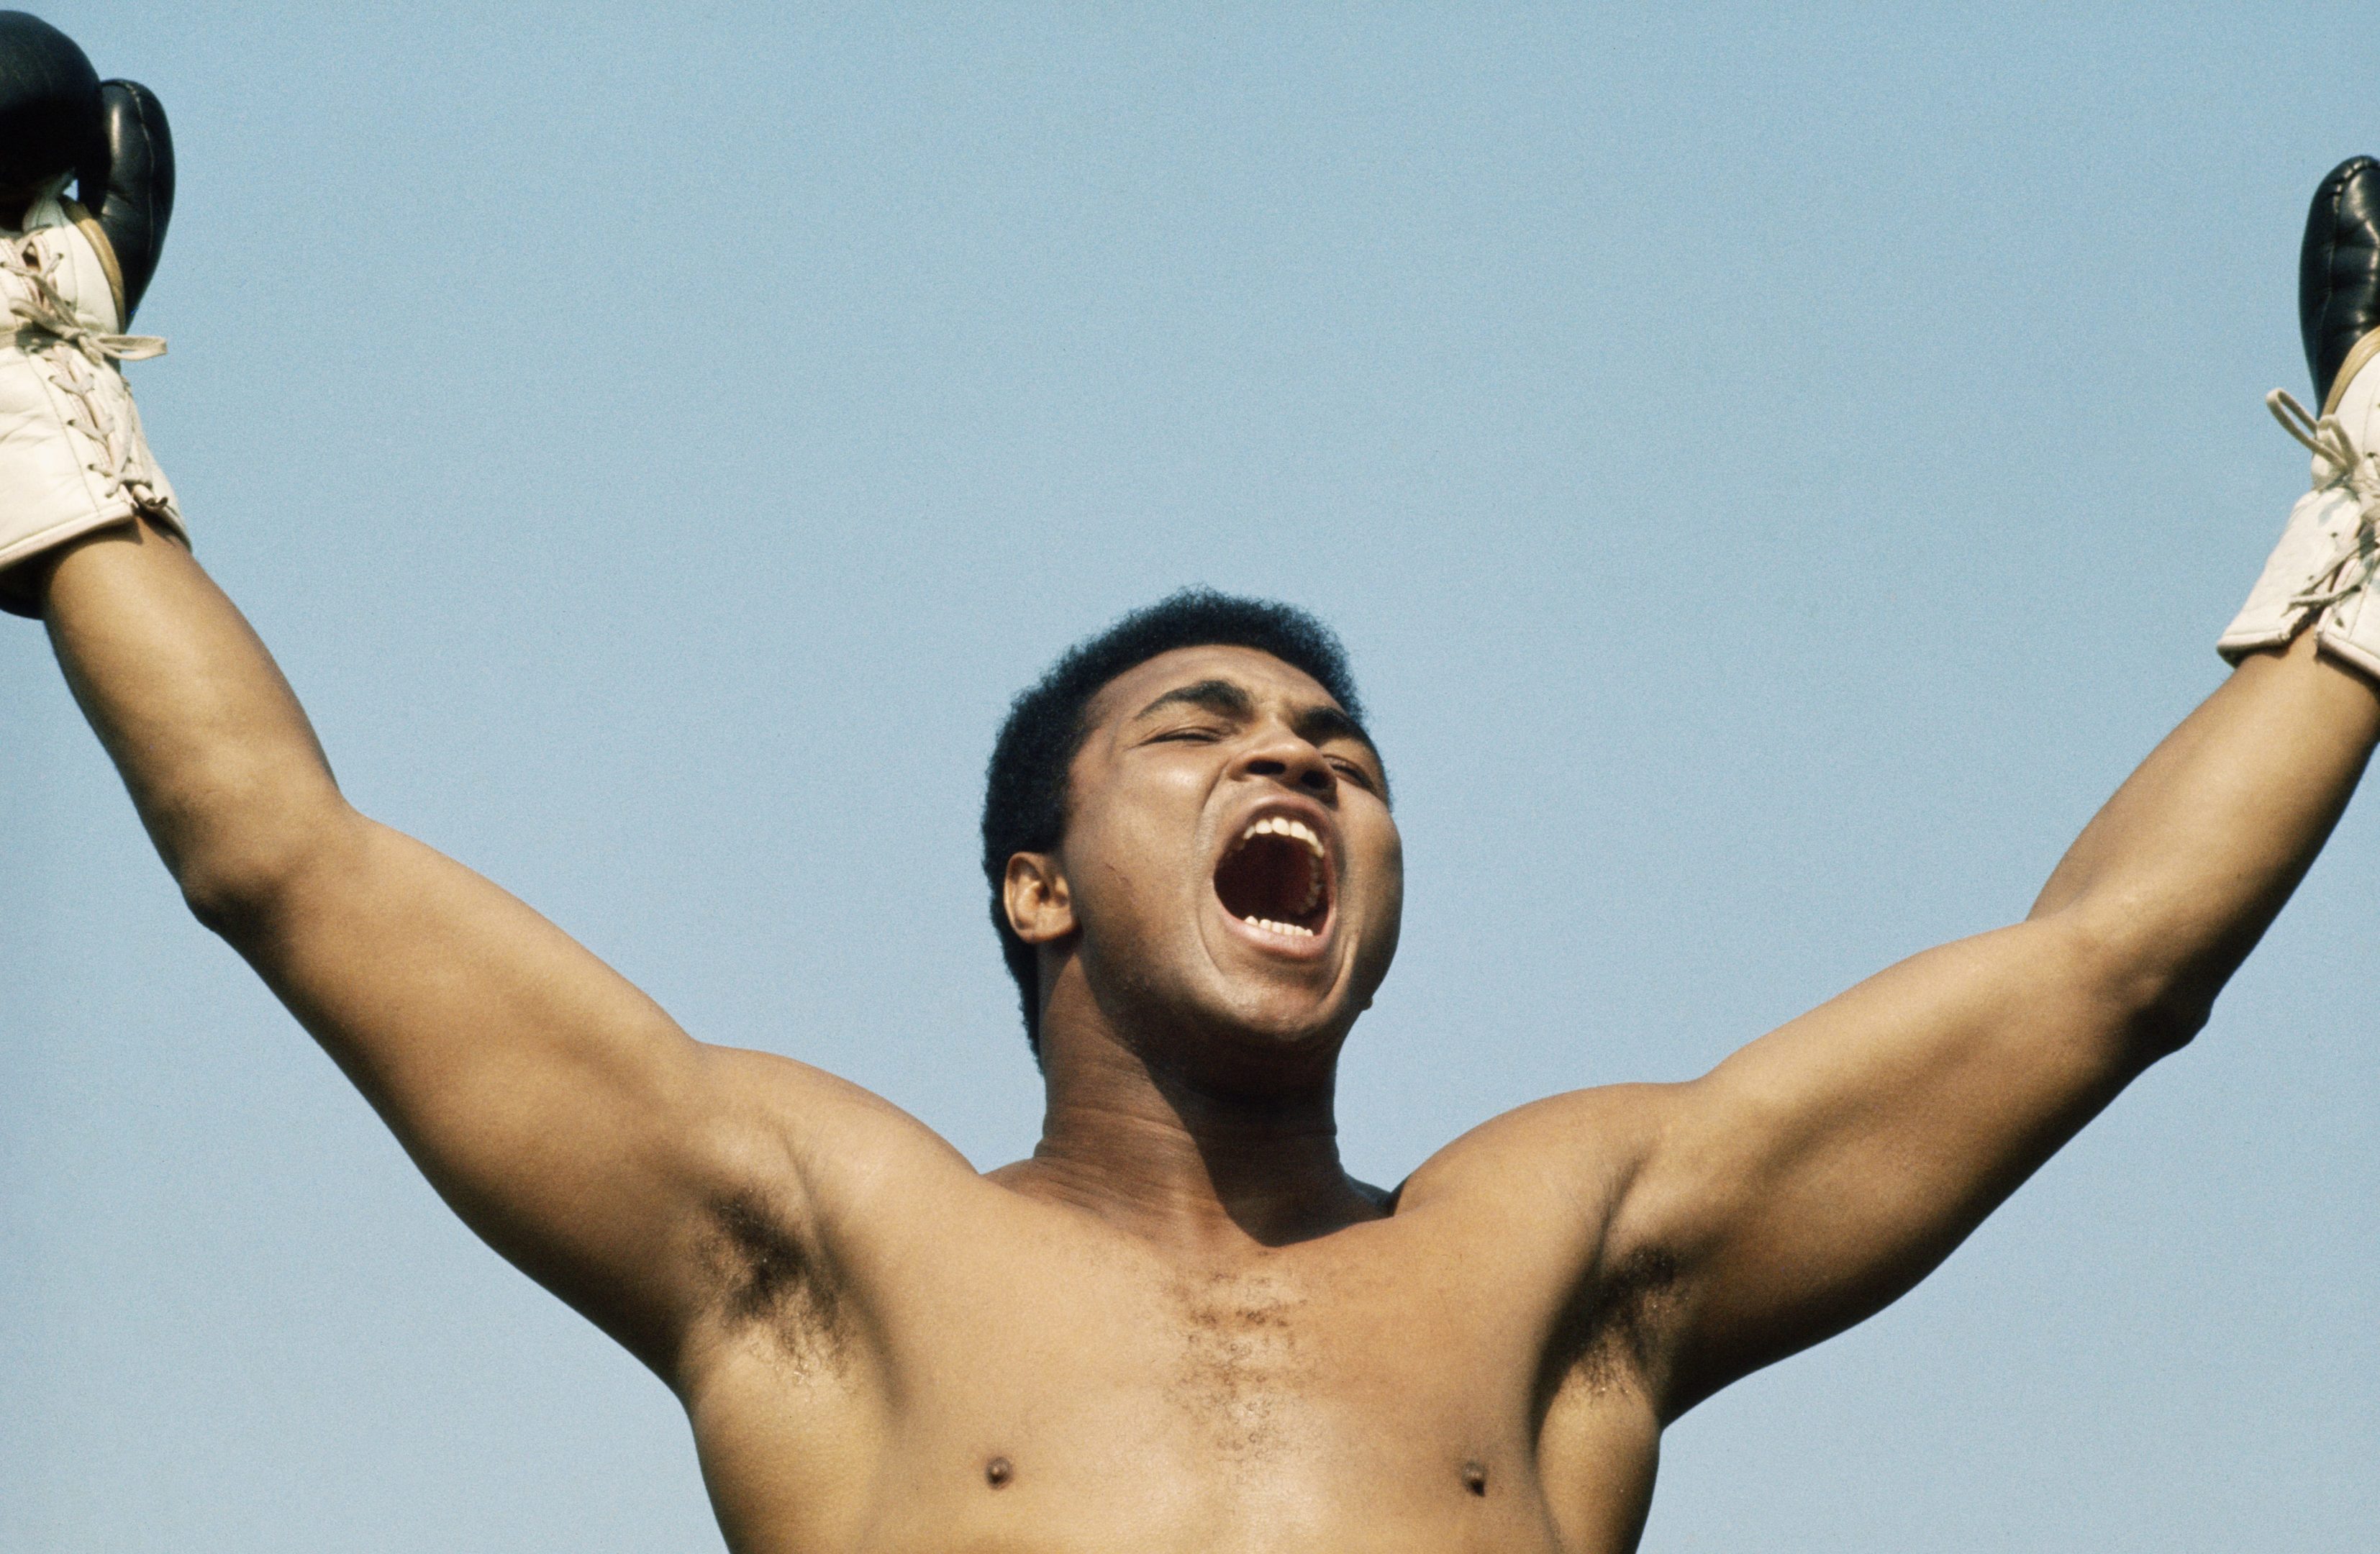 Muhammad Ali battled the disease for nearly 40 years until his passing in June this year